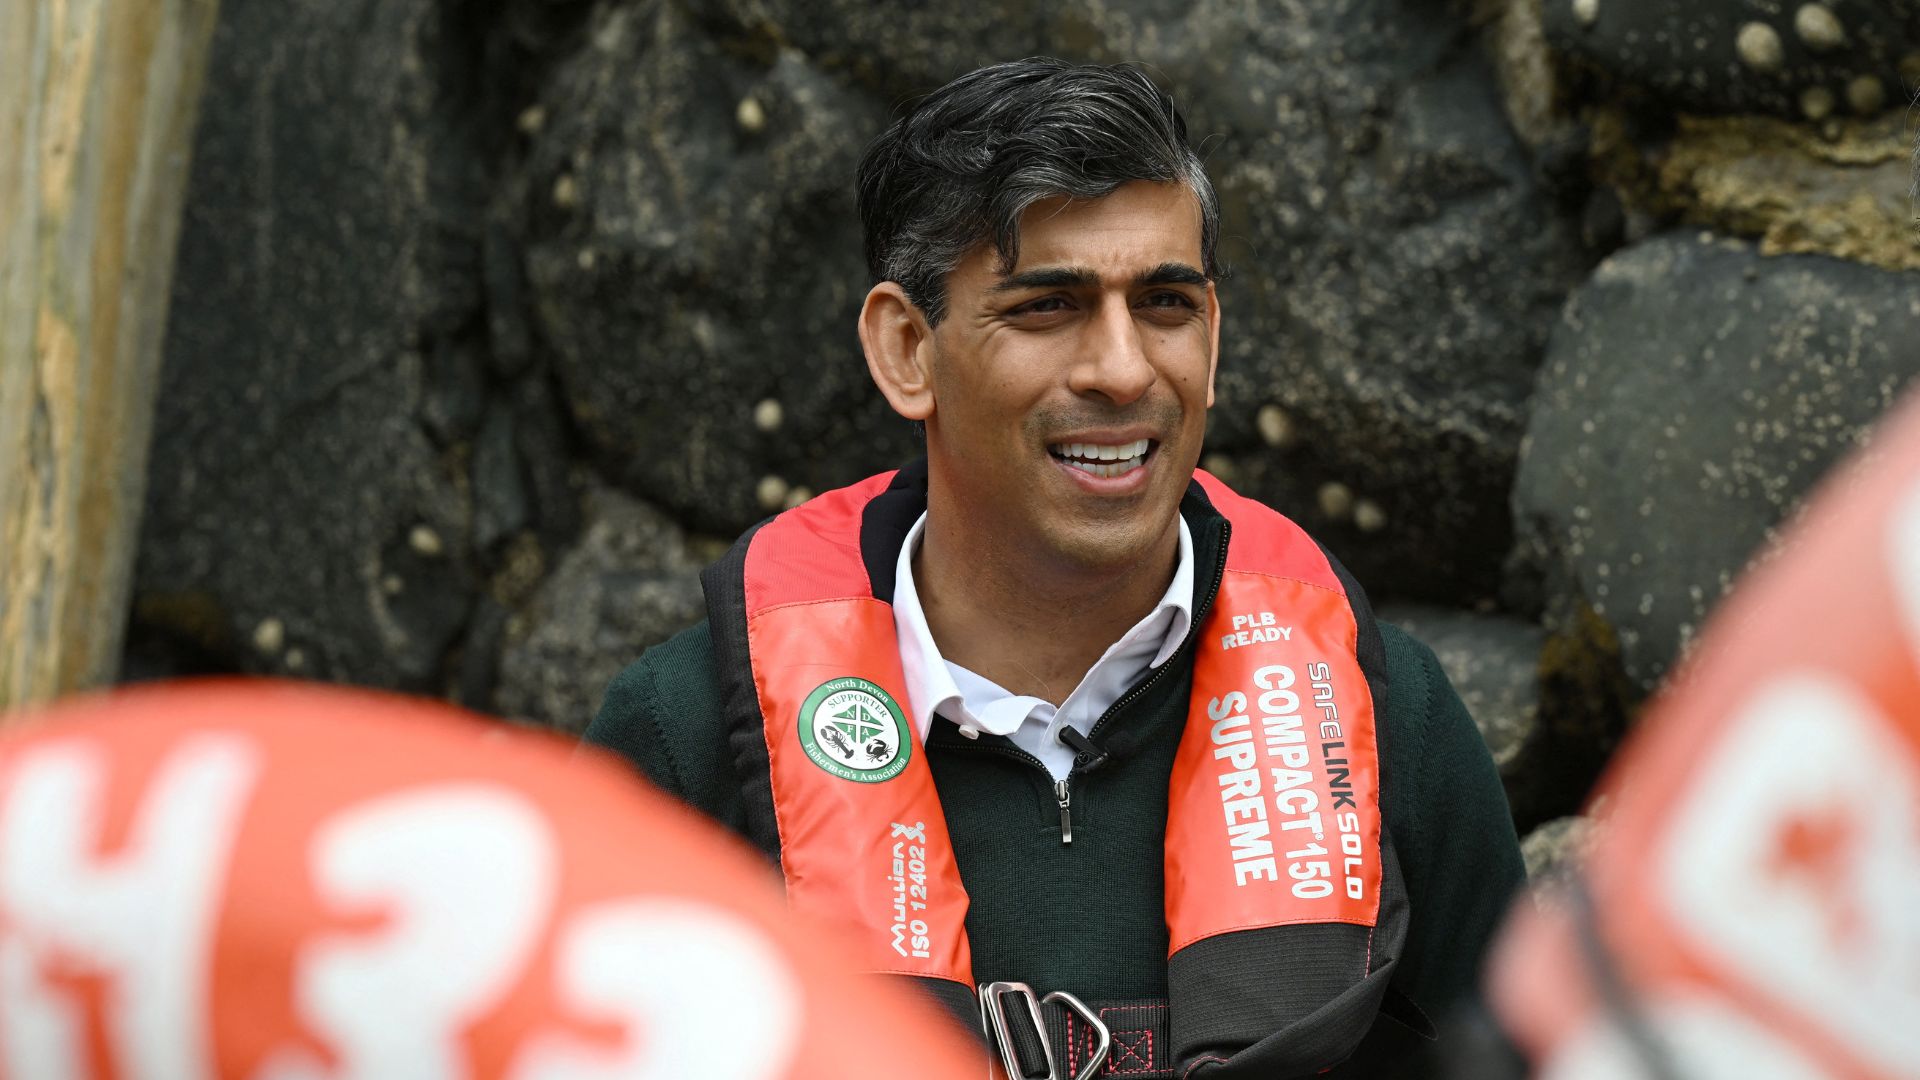 British Prime Minister Rishi Sunak wears a life jacket as he campaigns, in Clovelly. /Leon Neal/Pool via Reuters